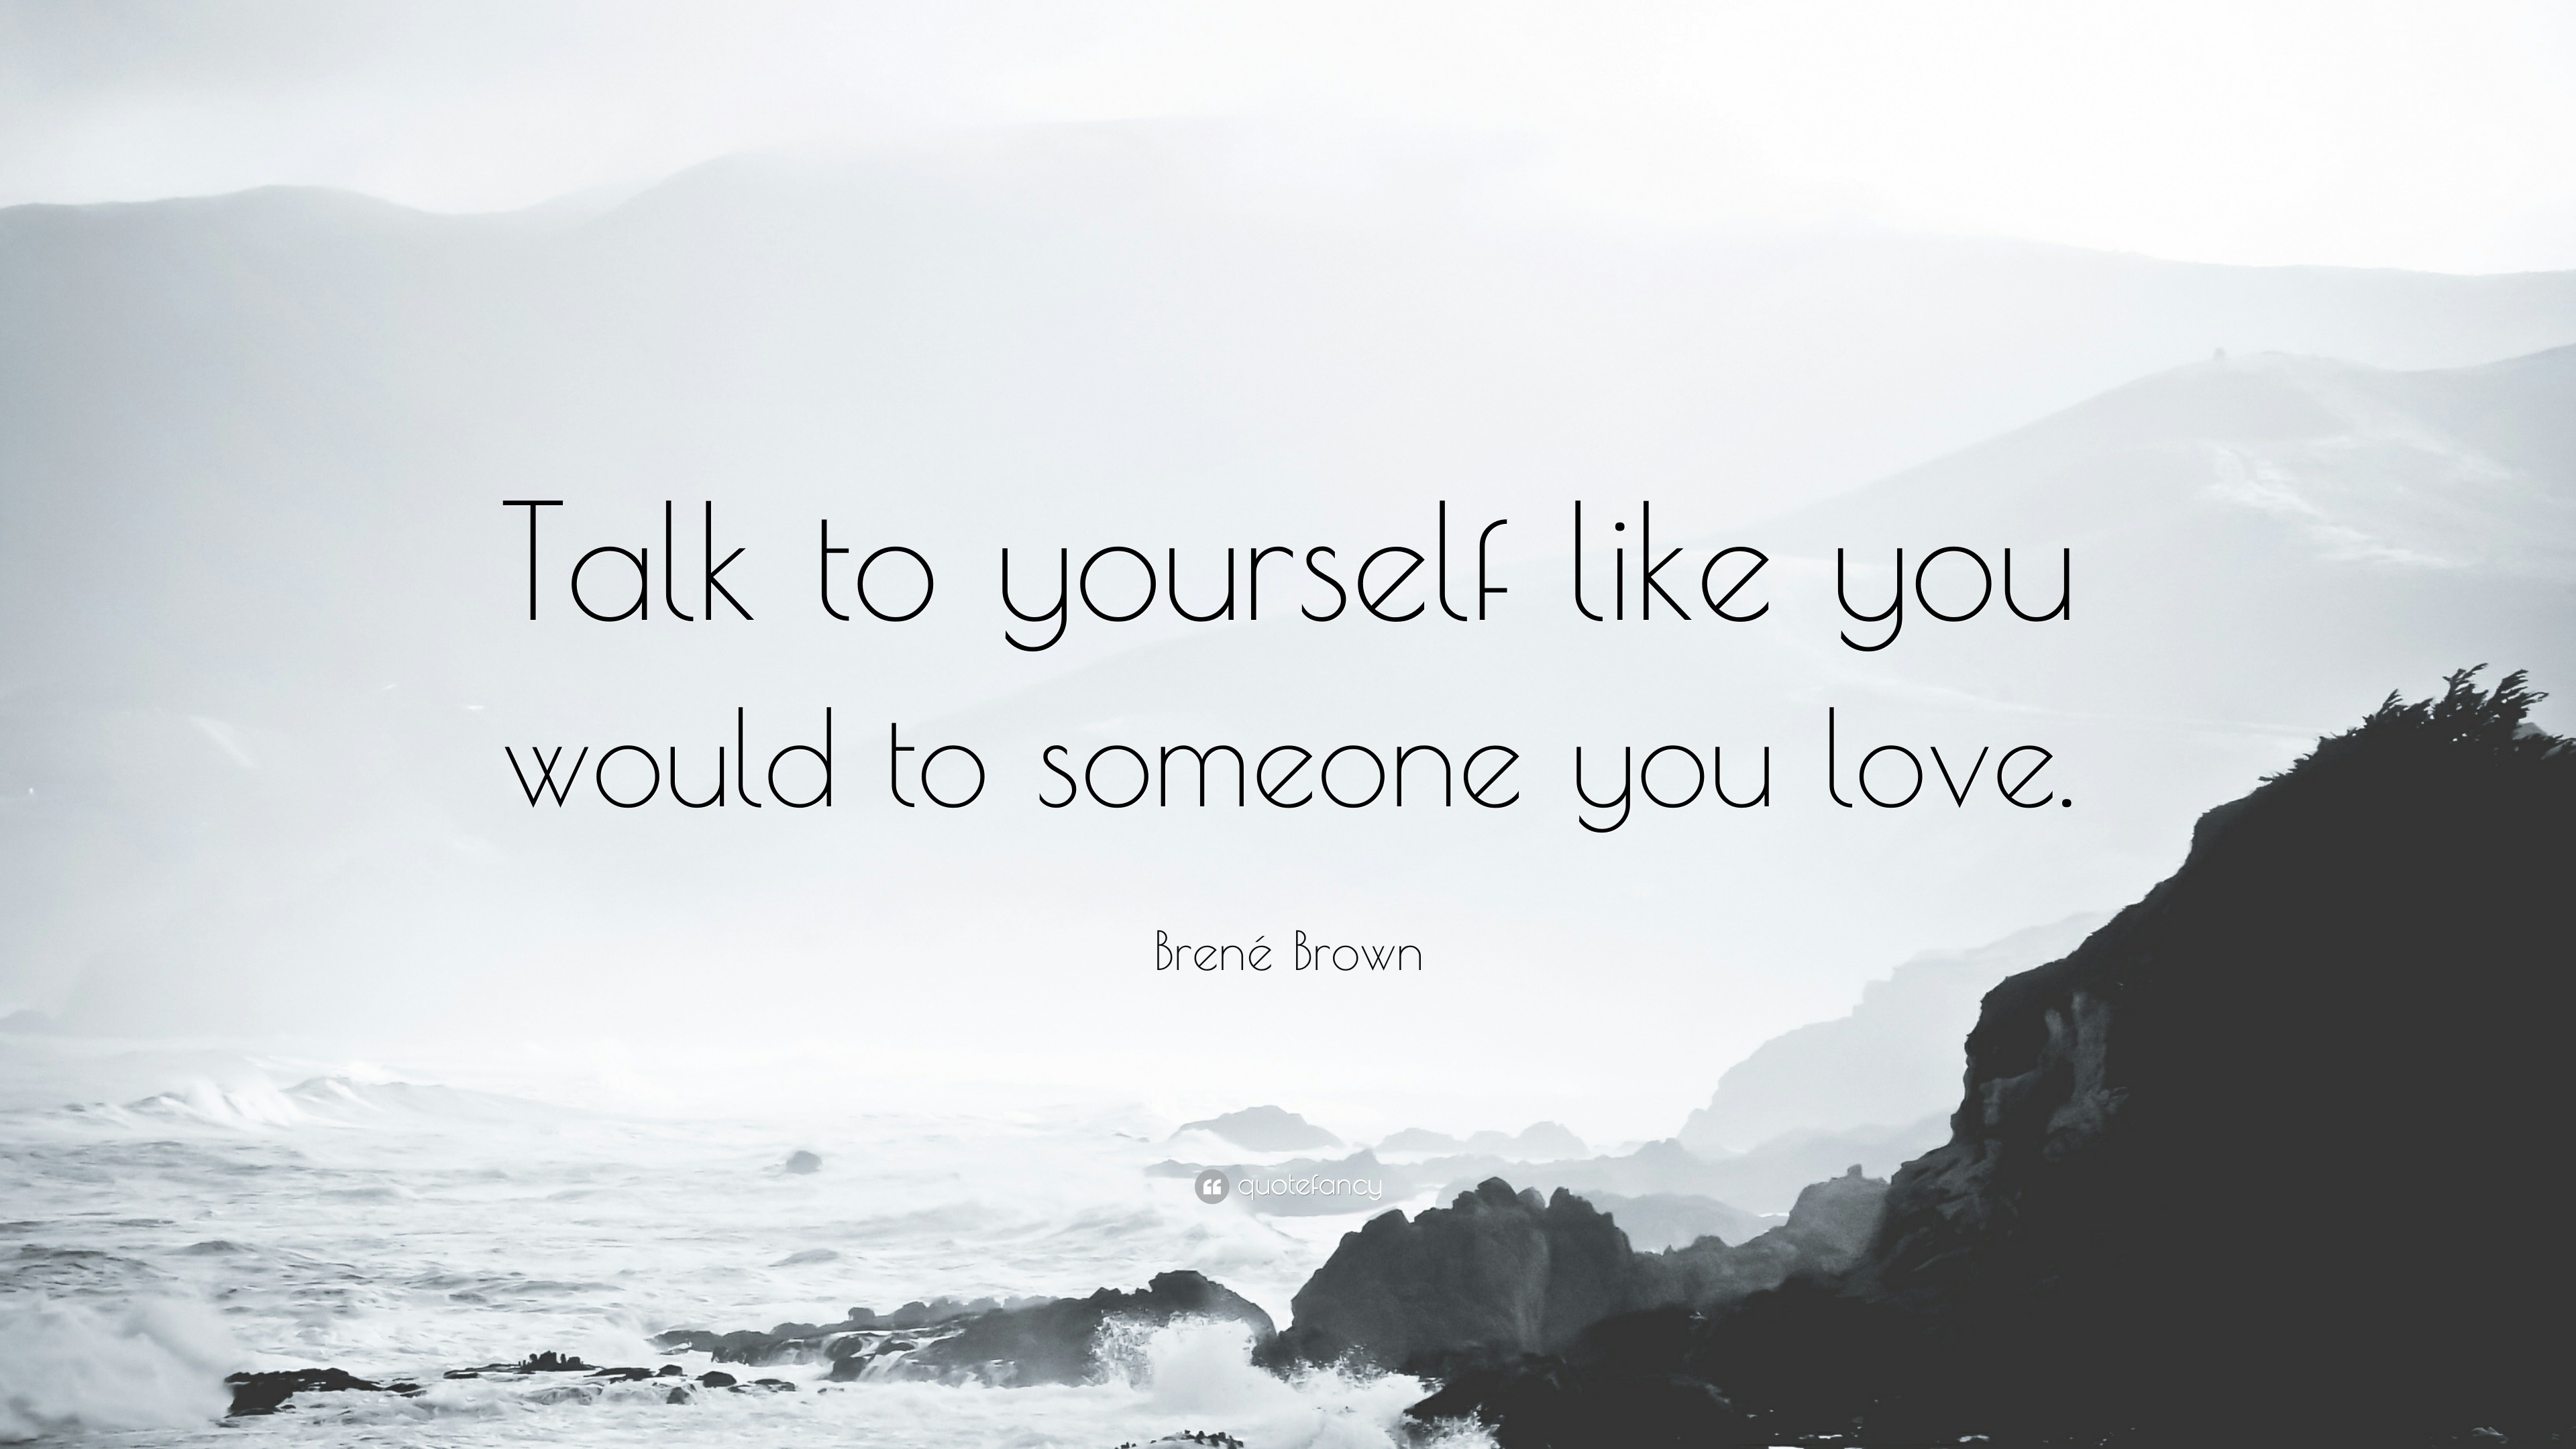 Brené Brown Quote: “Talk to yourself like you would to someone you love.”